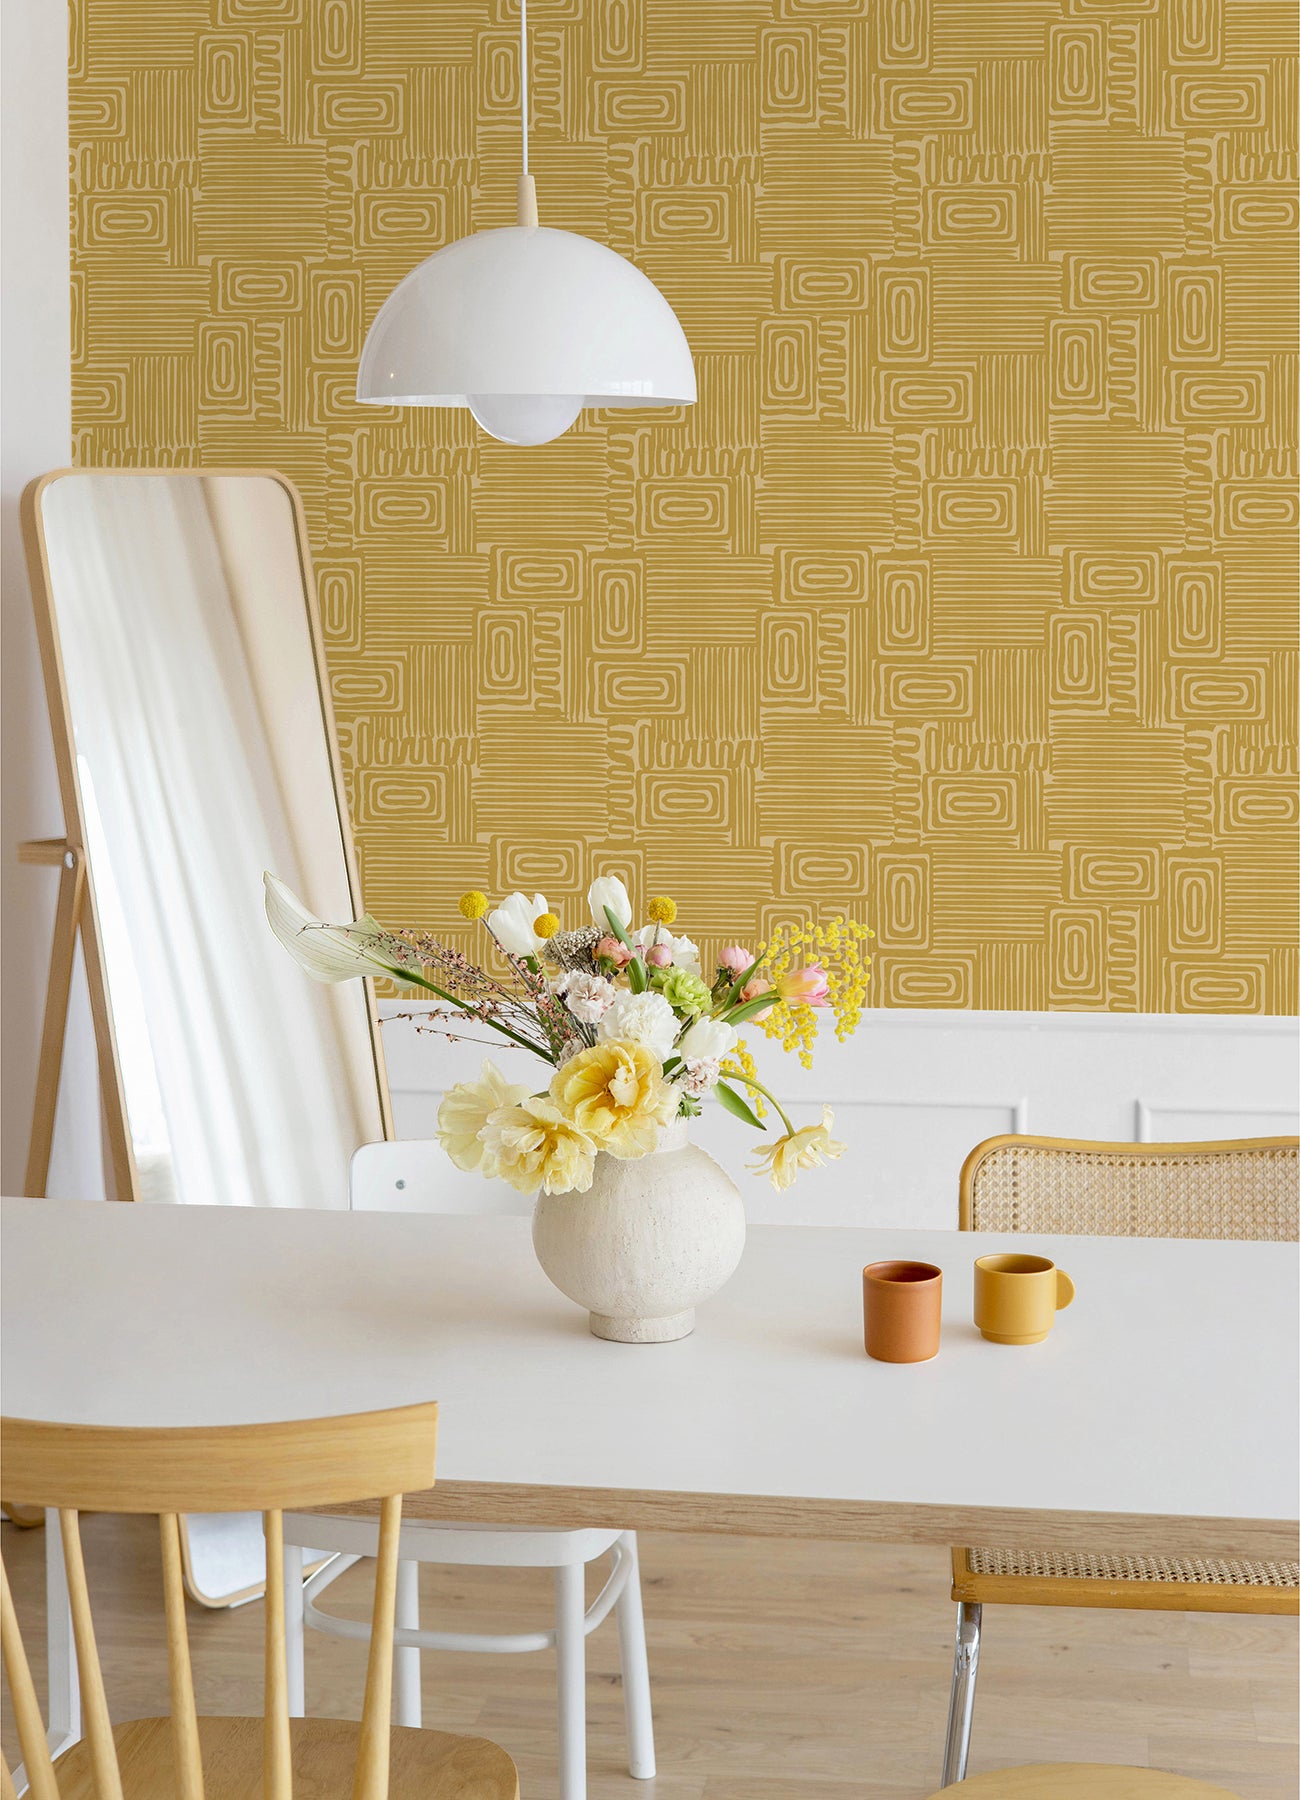 Emily Rayna Pathways Peel and Stick Wallpaper Peel and Stick Wallpaper RoomMates   